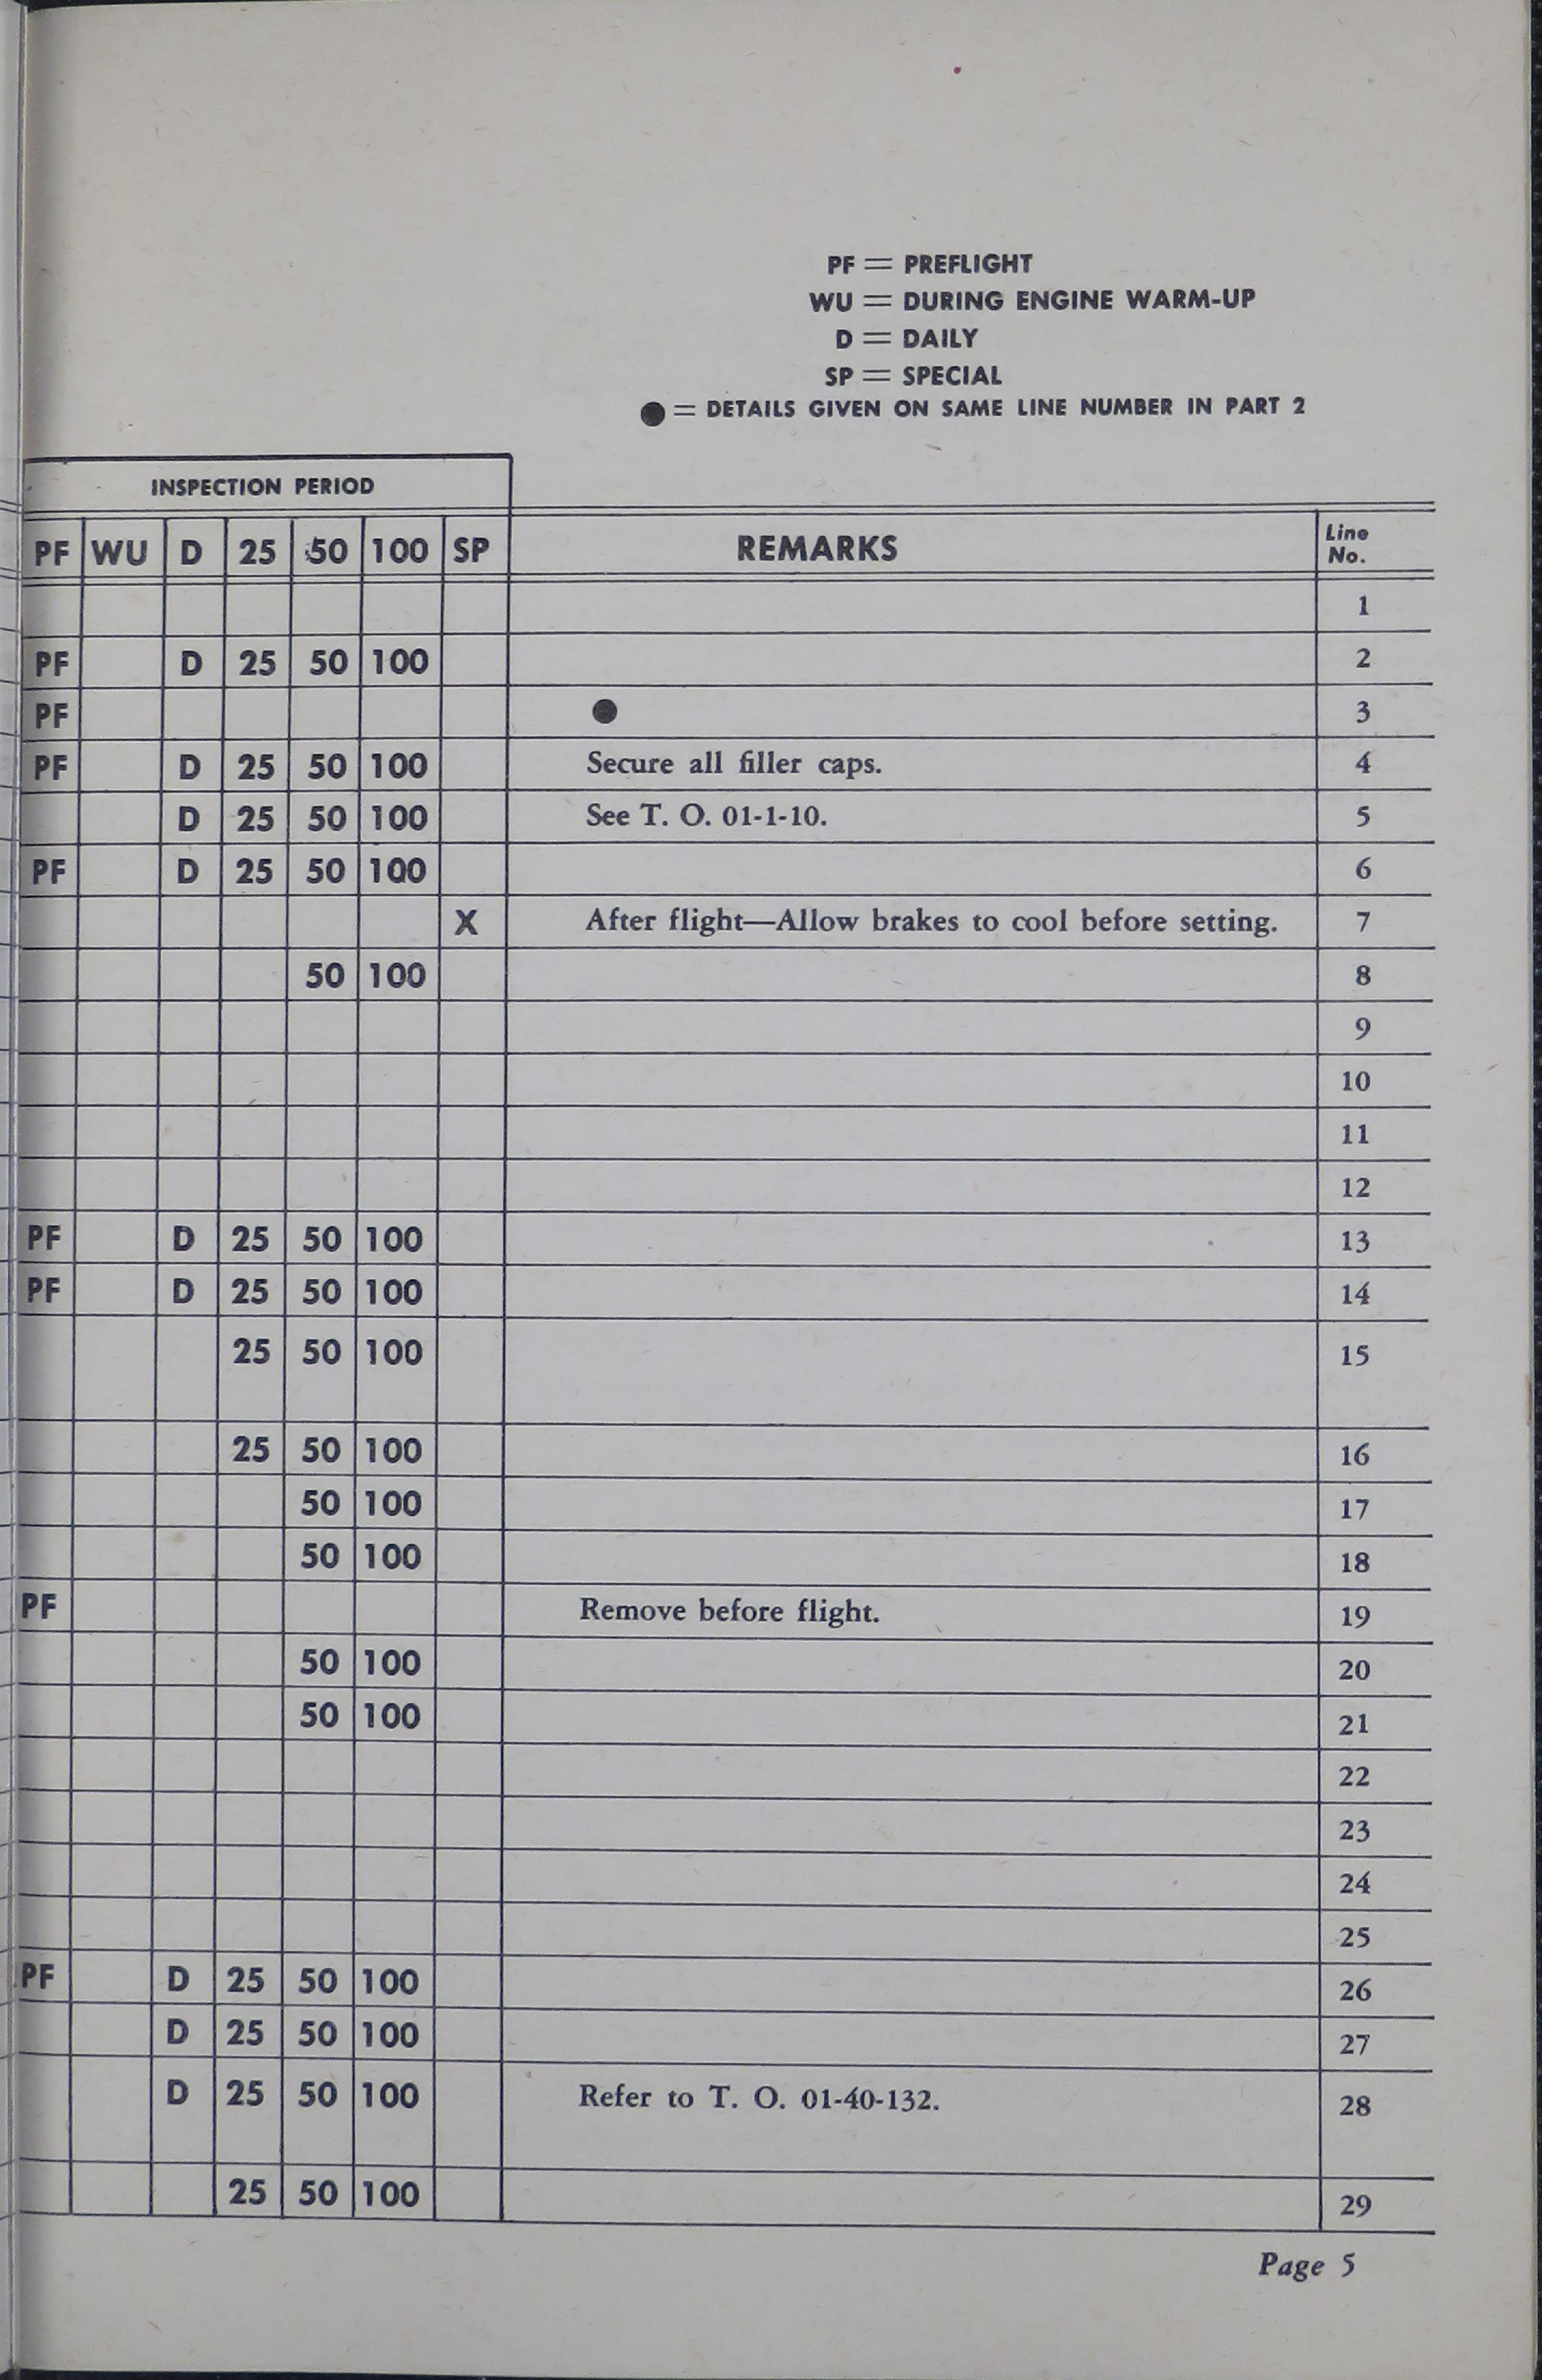 Sample page 9 from AirCorps Library document: Inspection and Maintenance Guide for A-20 Series Aircraft